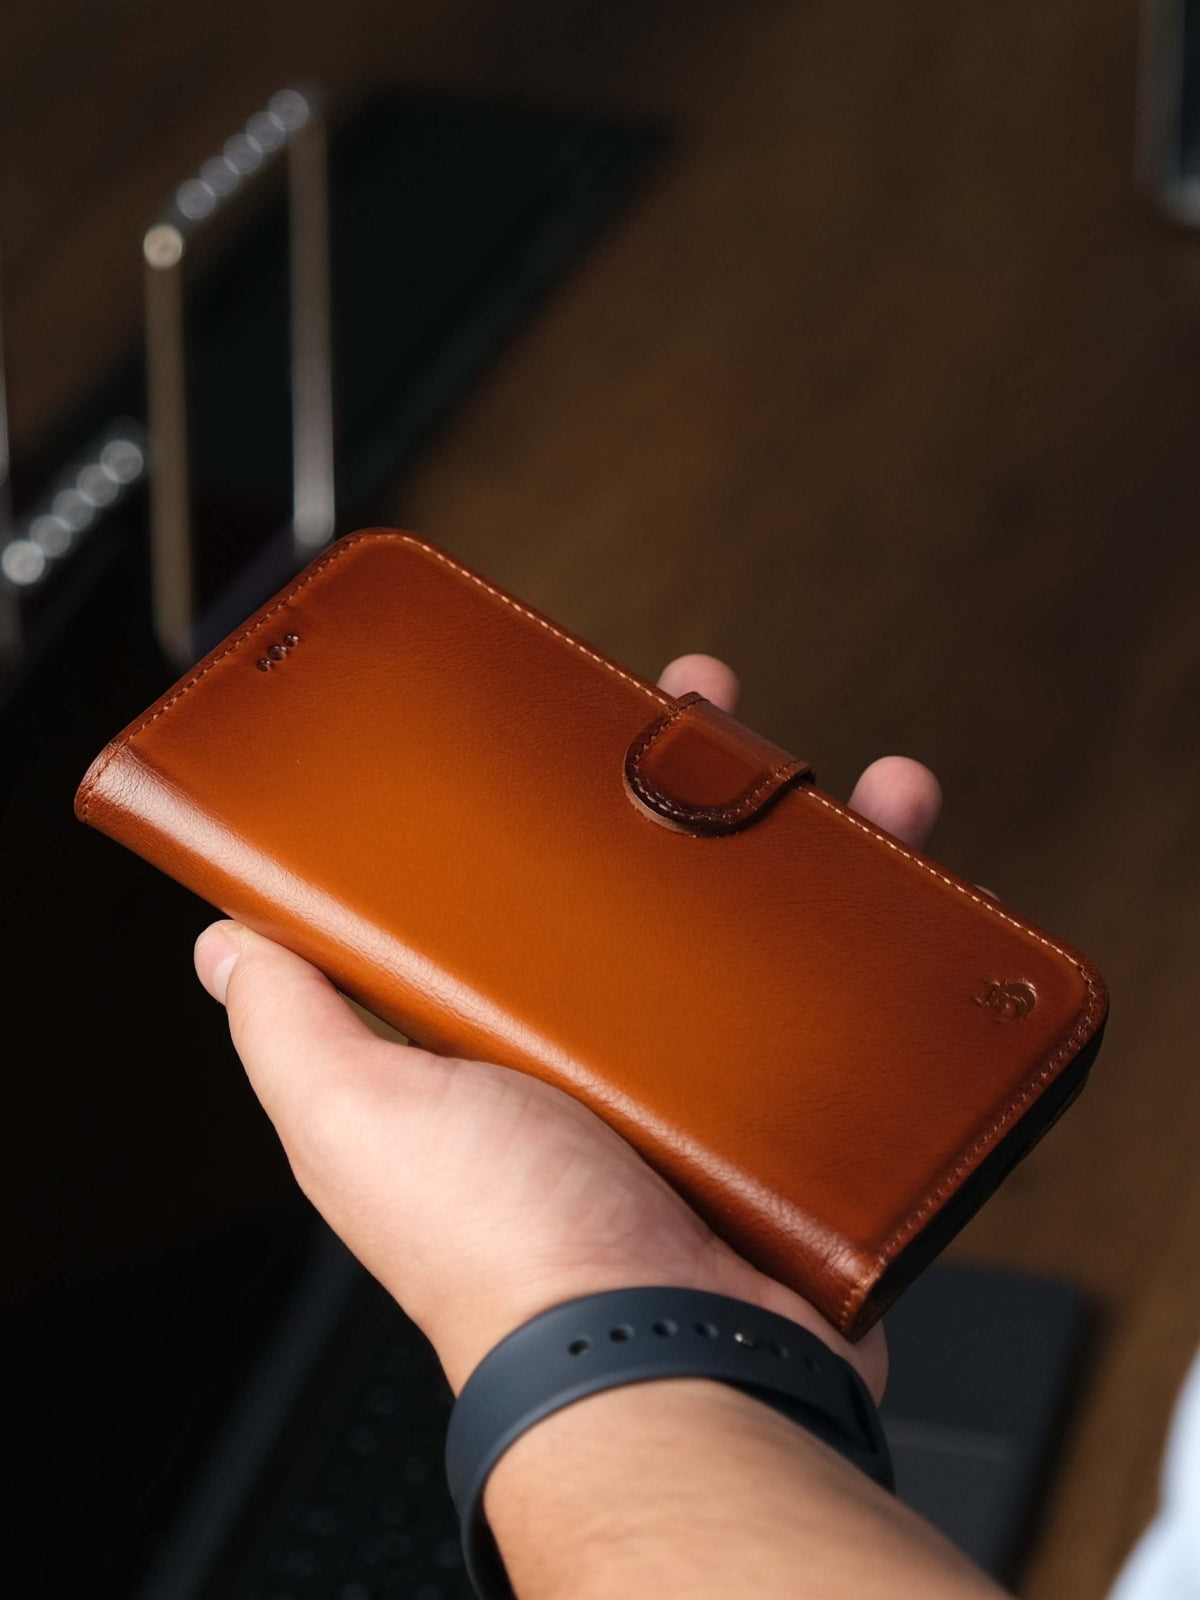 Luxury Leather iPhone Cases, Watch Bands, Bags & Wallets - TORONATA